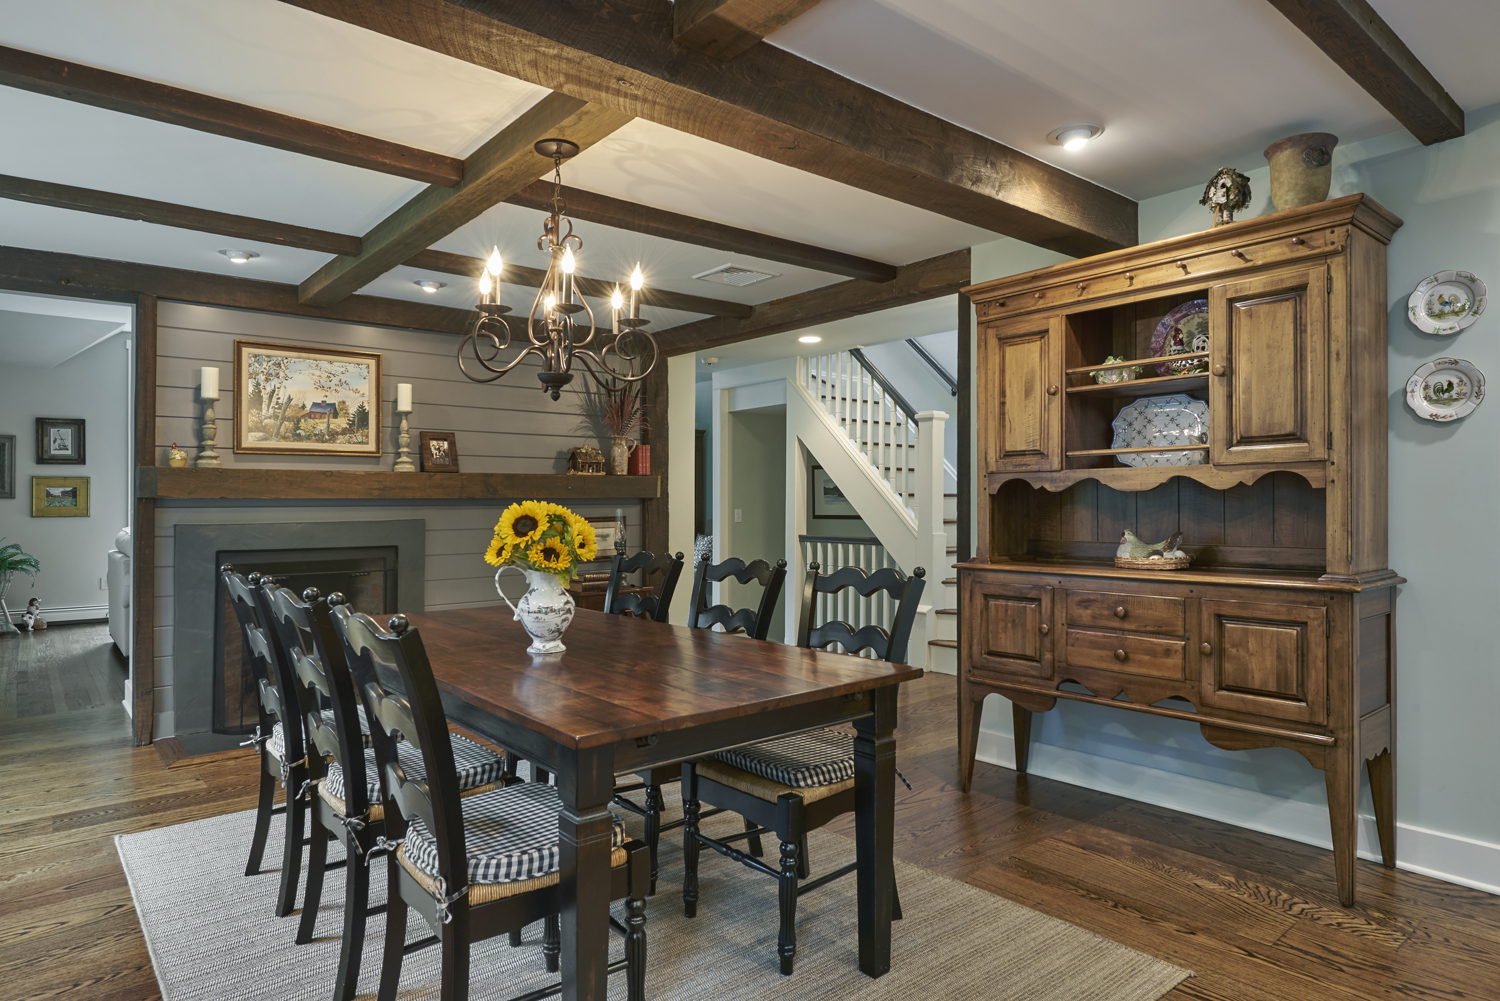 New Open Dining Area with Antique Beams